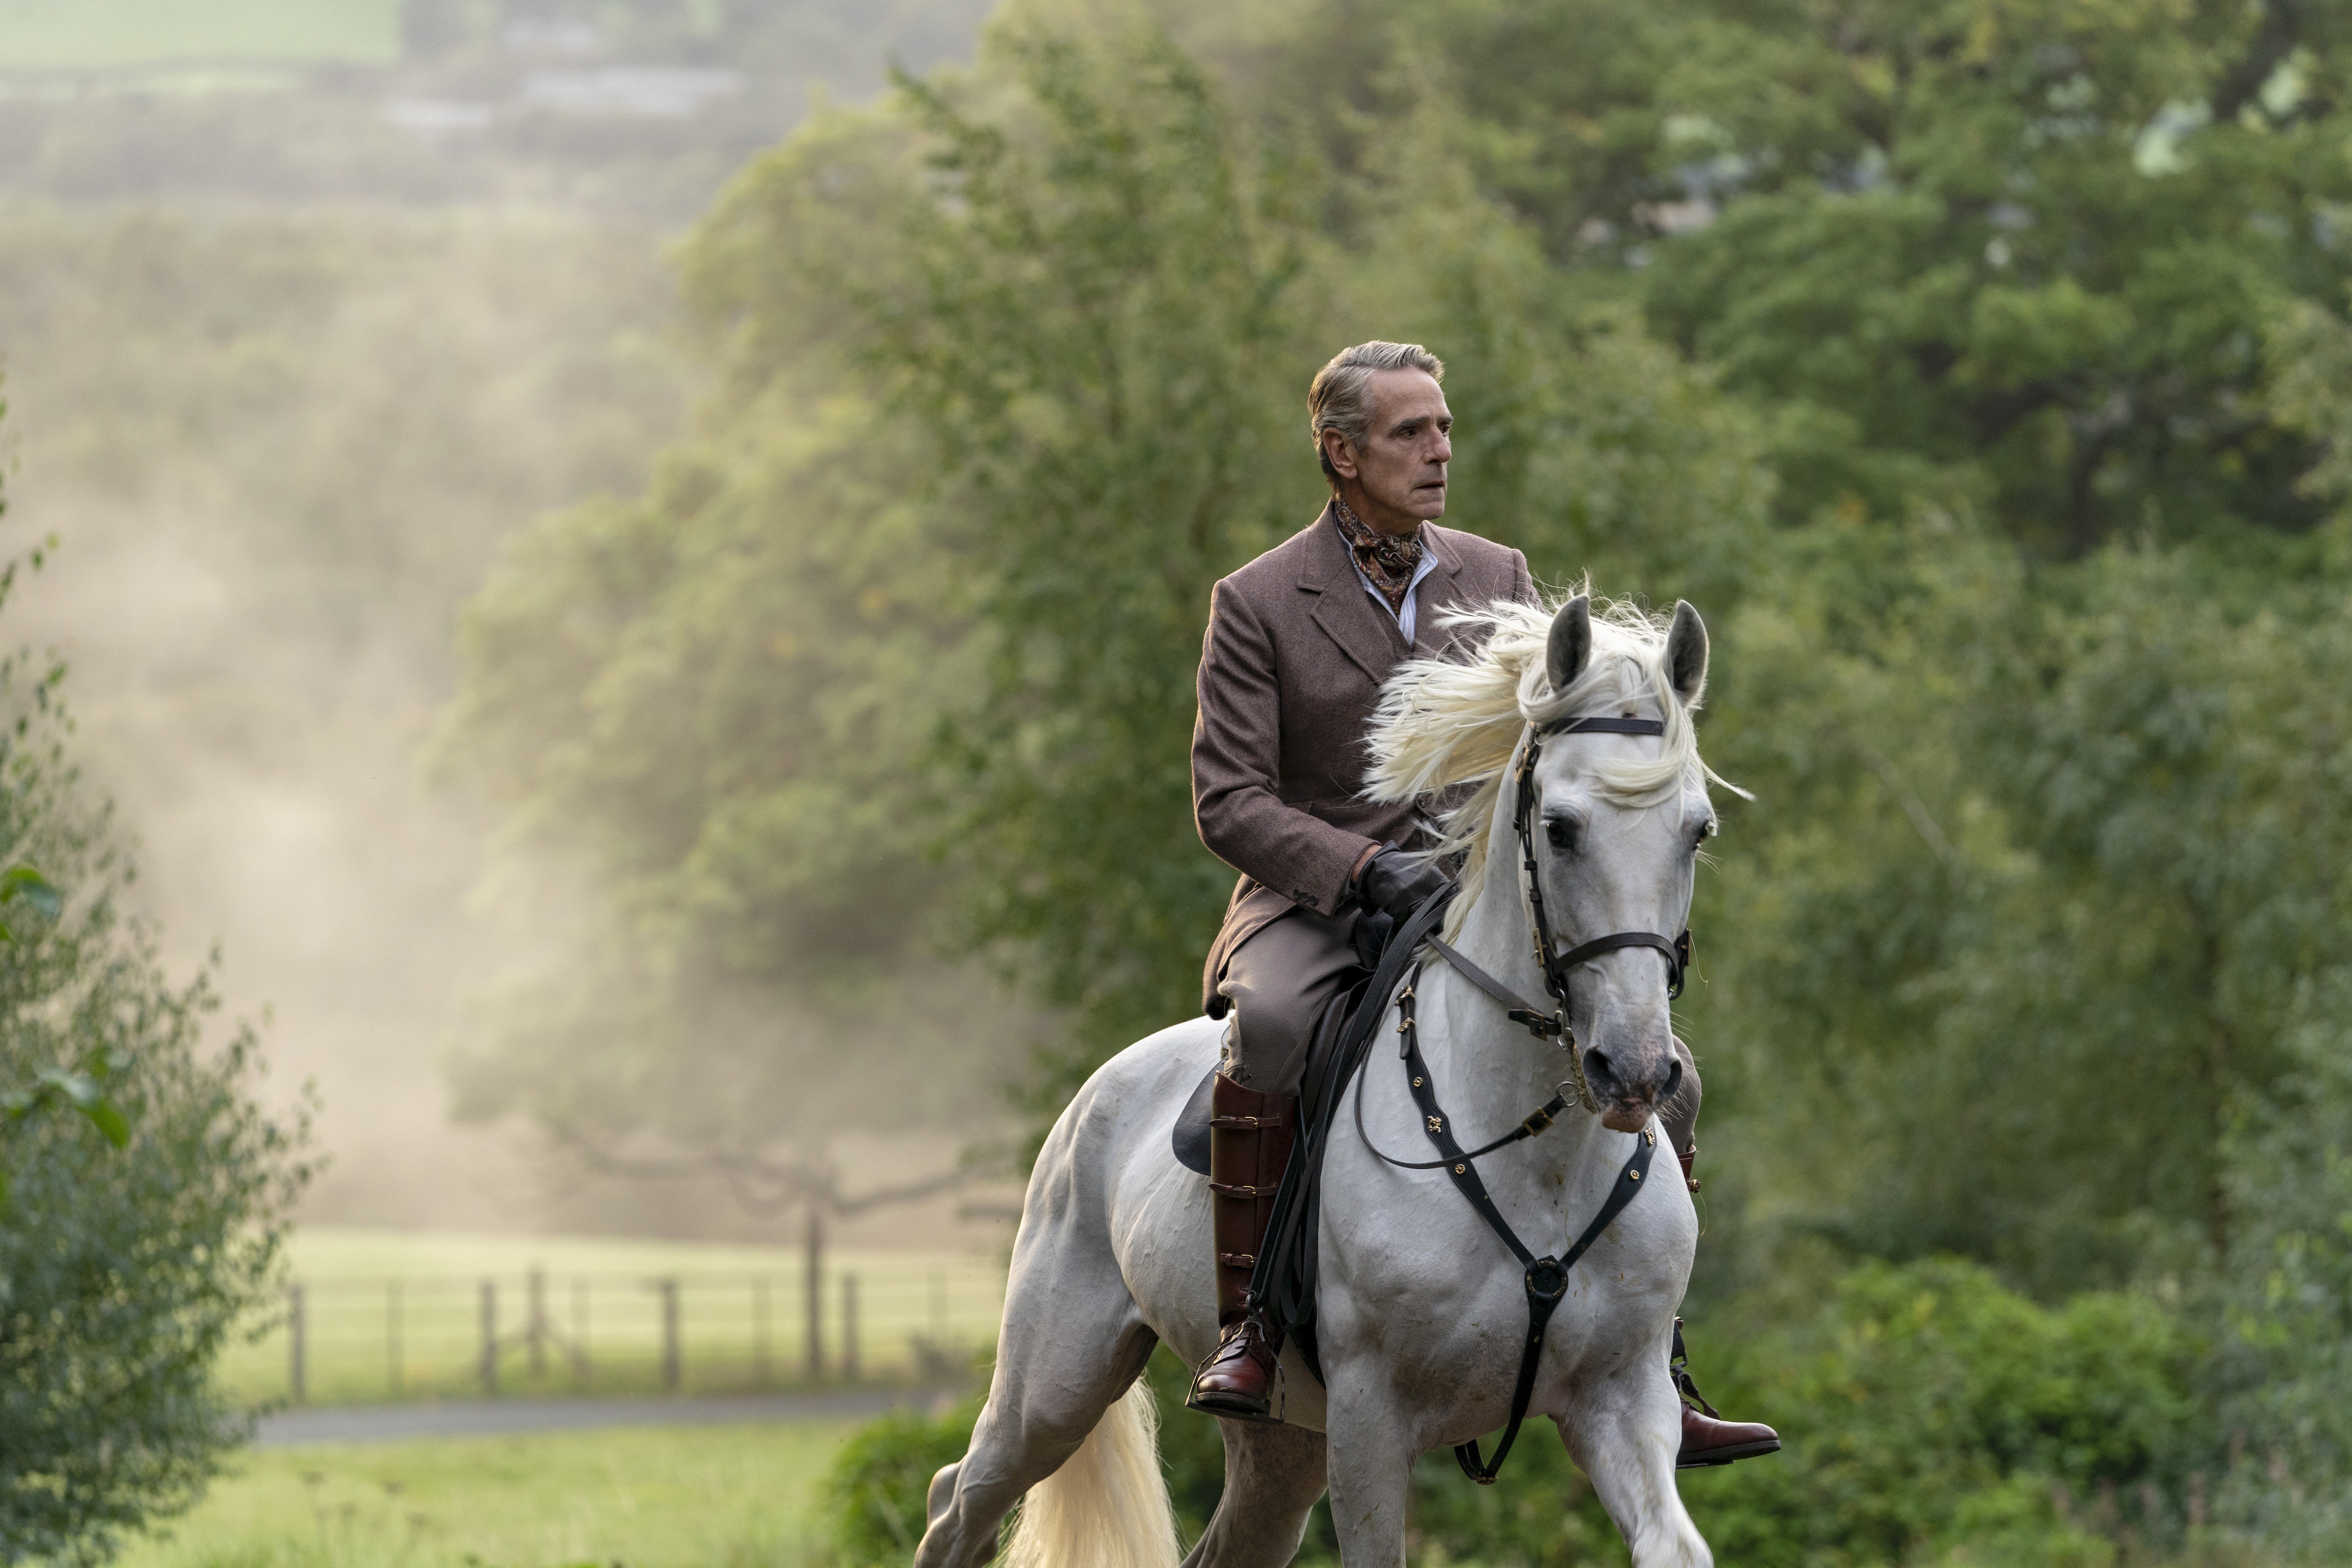 Jeremy Irons rides a horse, innocuously.